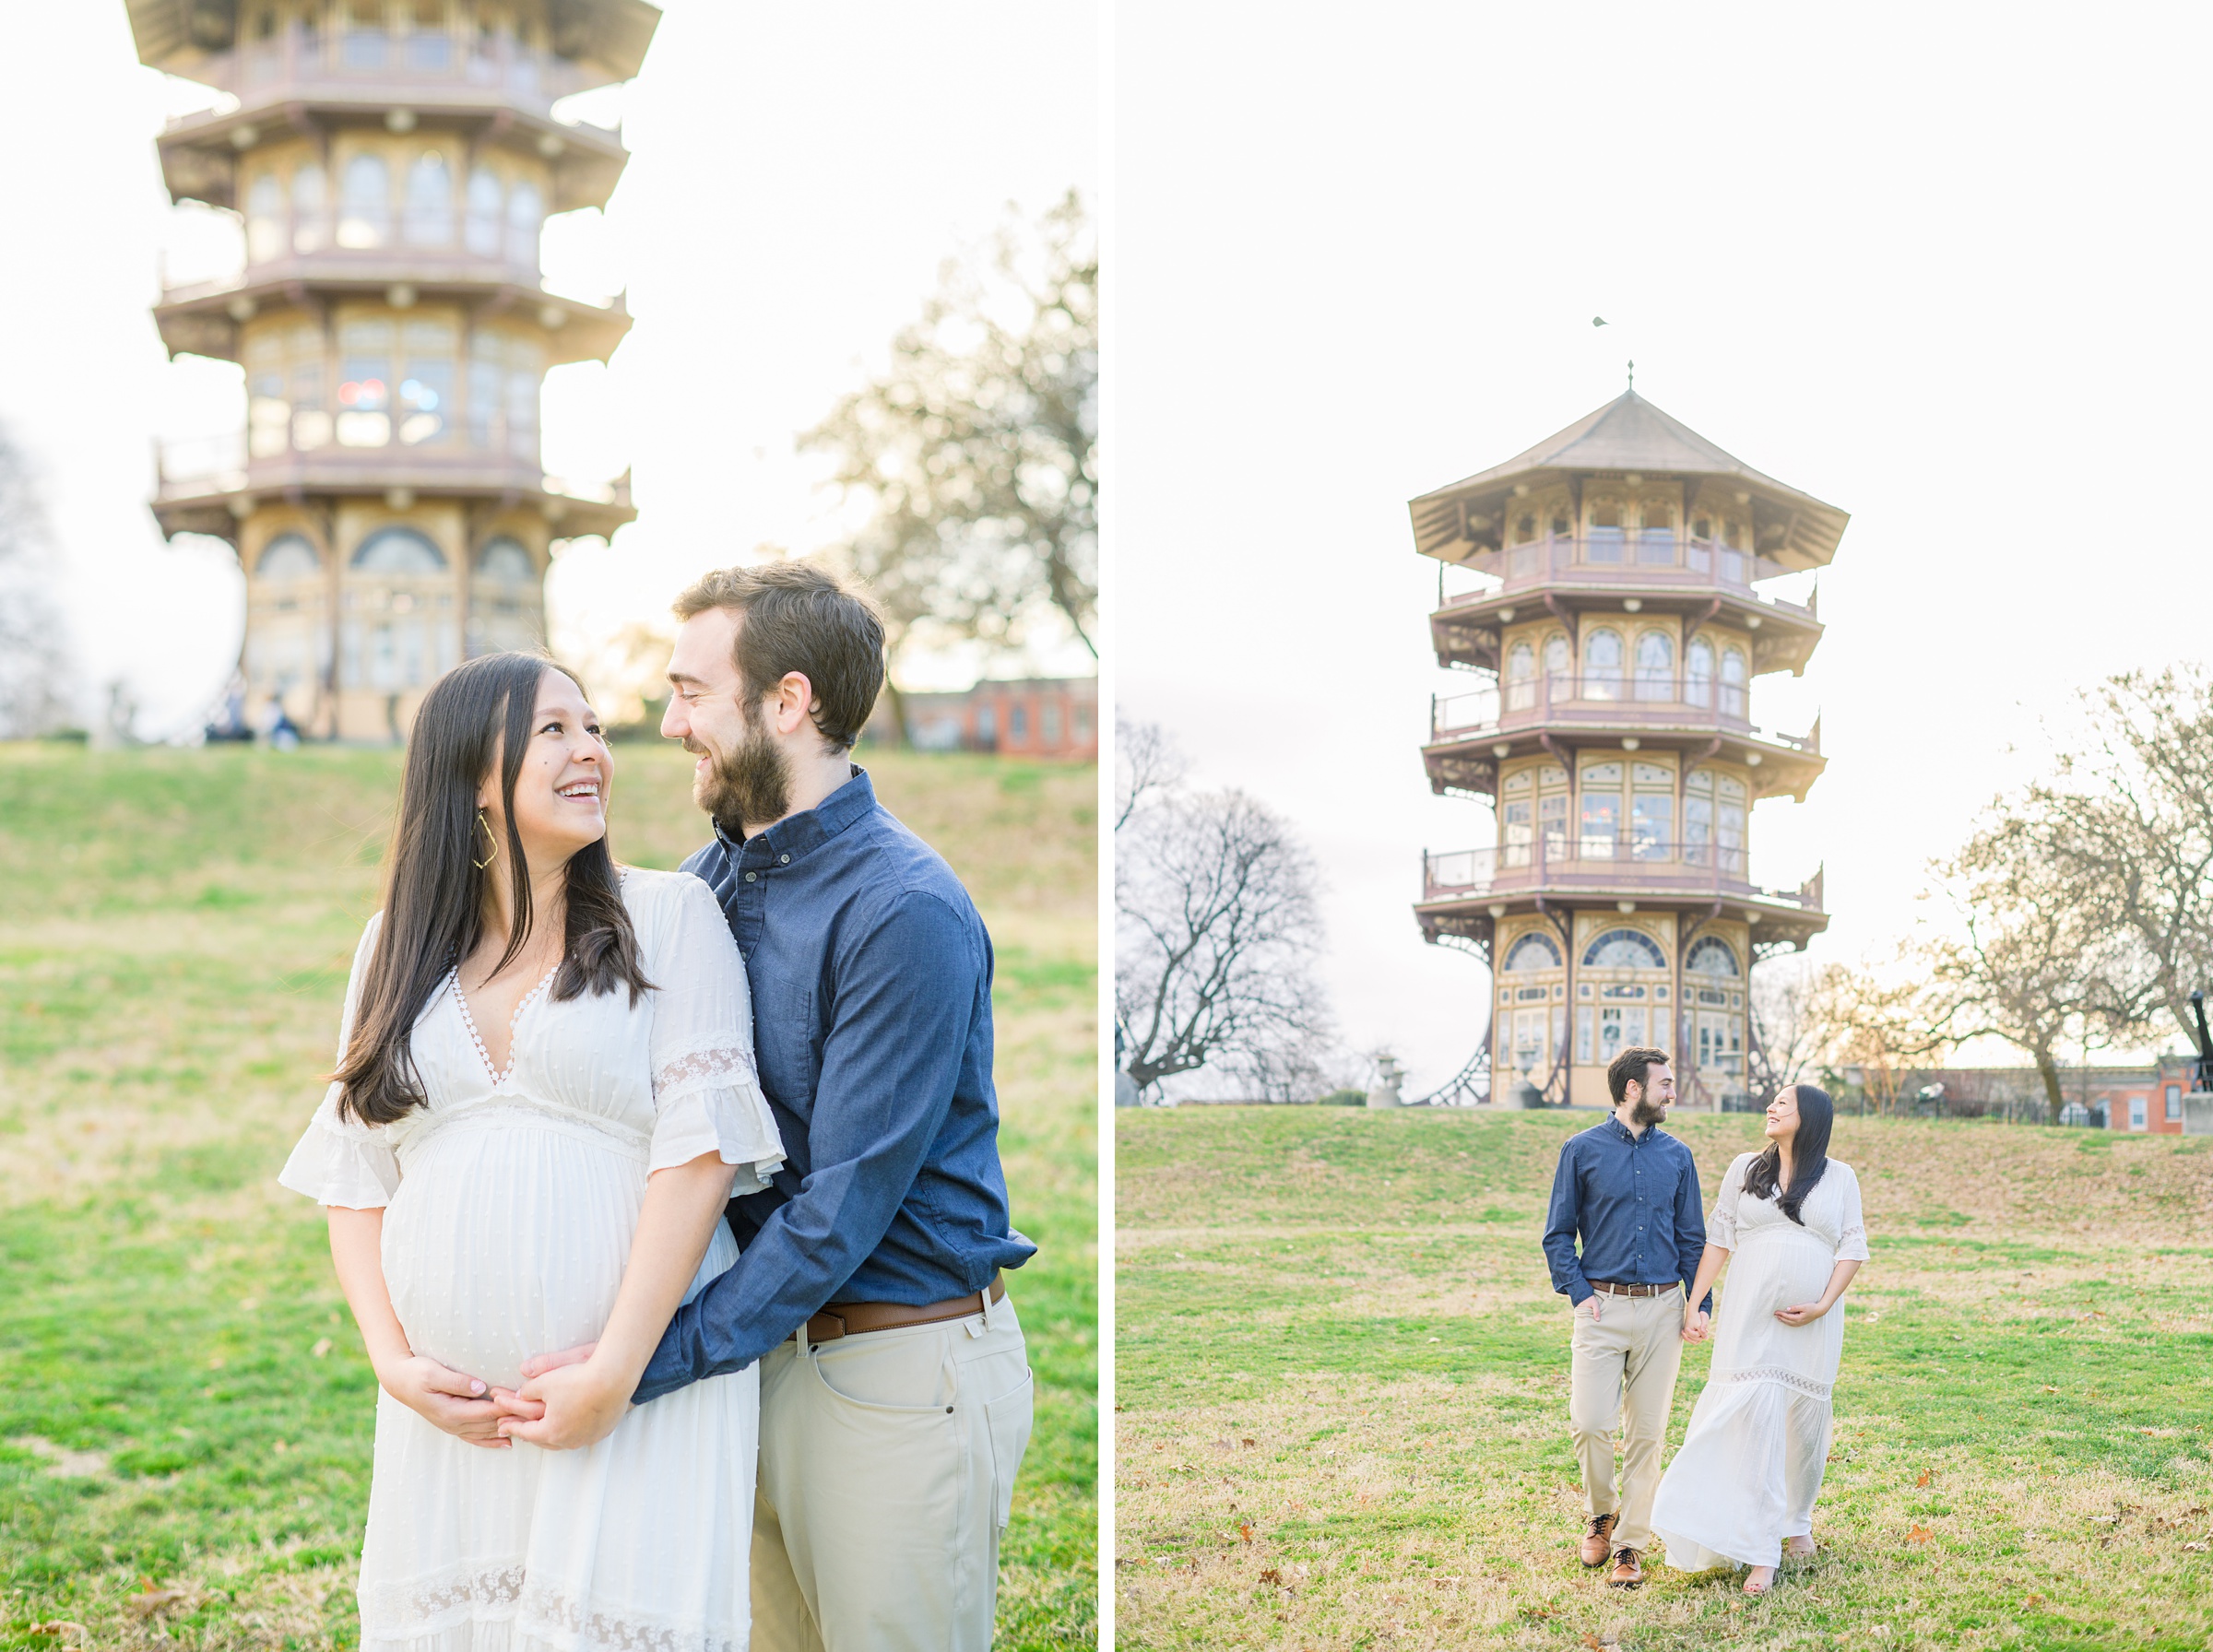 Abby and Nick's maternity photos in Patterson Park in Baltimore County featuring a stunning golden hour and beautiful pink trees.